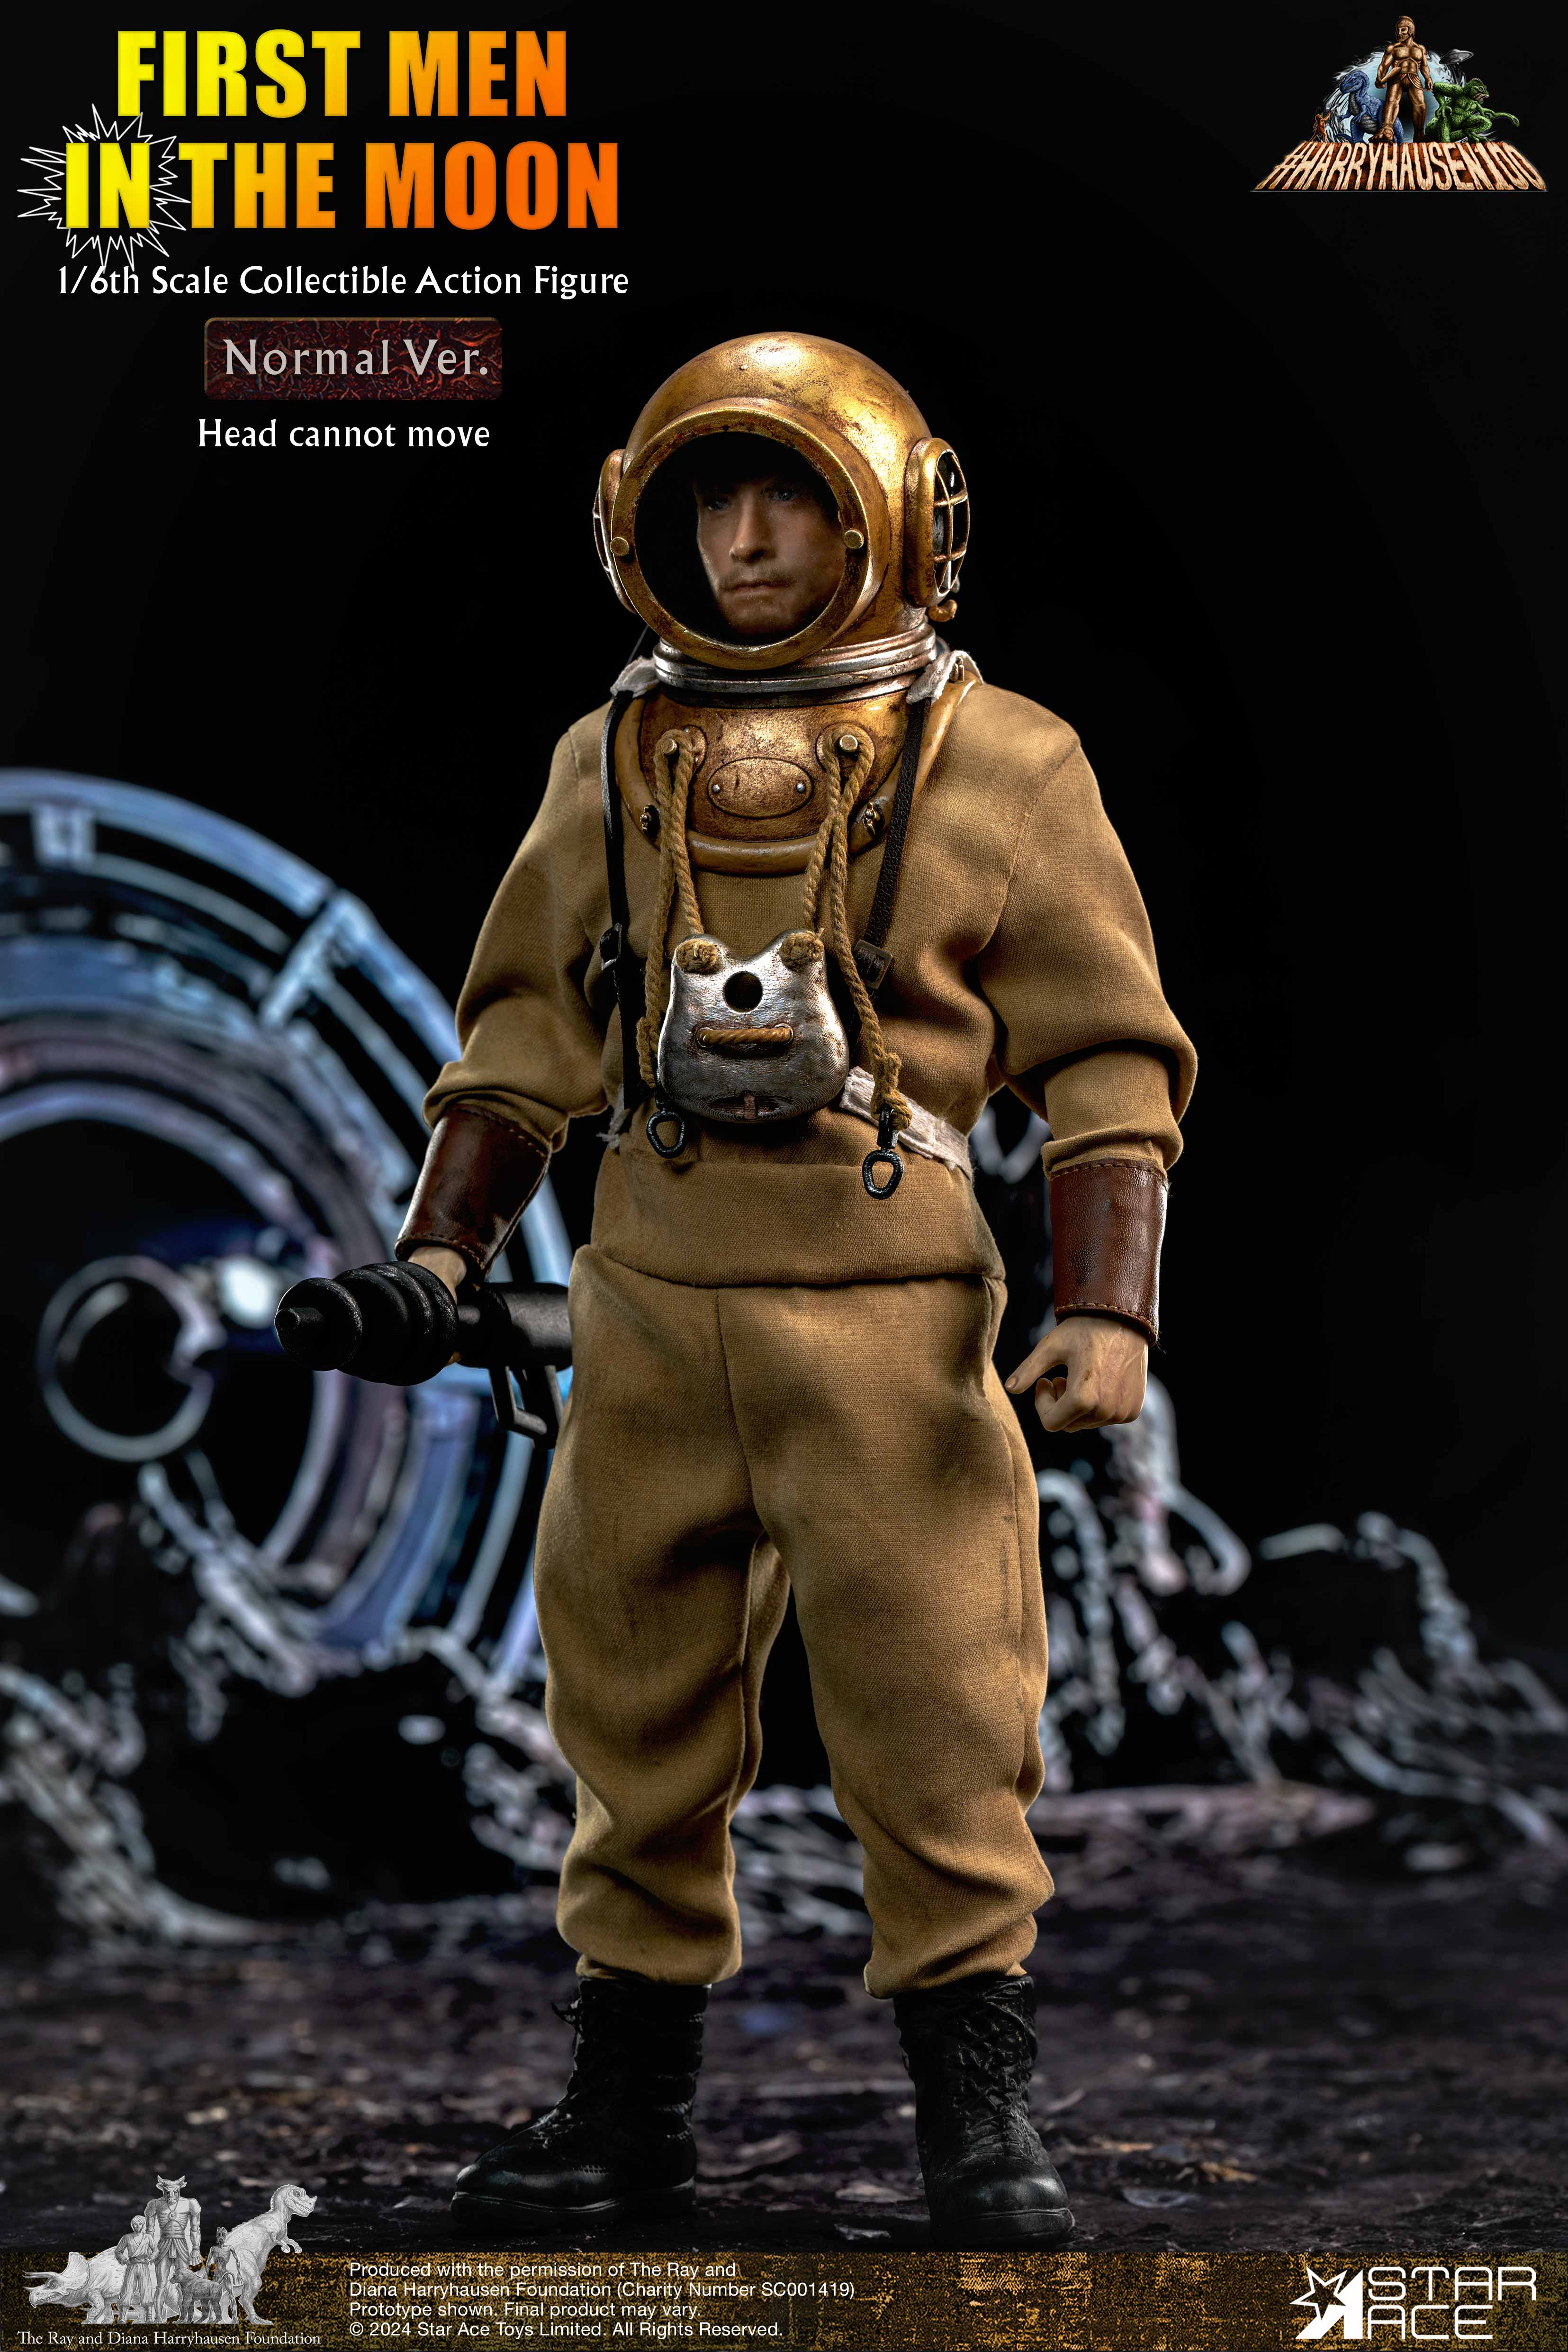 First Men in the Moon: Arnold Bedford: Normal Version: Sixth Scale Star Ace